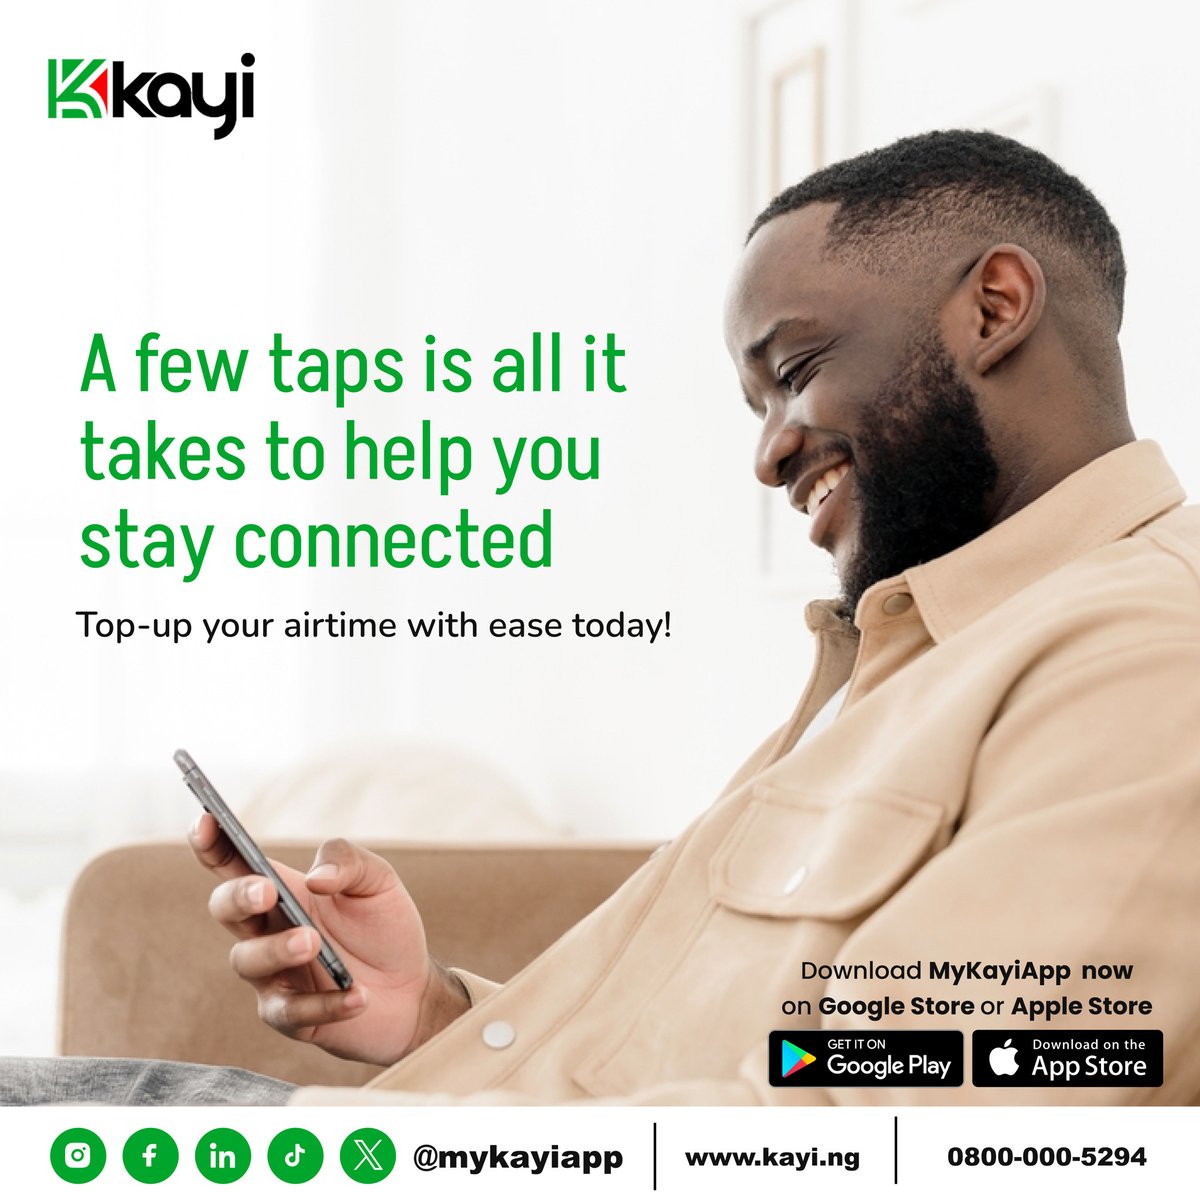 Embrace convenience with Kayiapp! Topping up airtime has never been easier – just a few clicks and you're connected. Experience seamless transactions with cutting-edge technology. Try Kayiapp now!

#AIInnovation #EasyTopUp #MyKayiapp
#Kayiway
#Digitalbanking